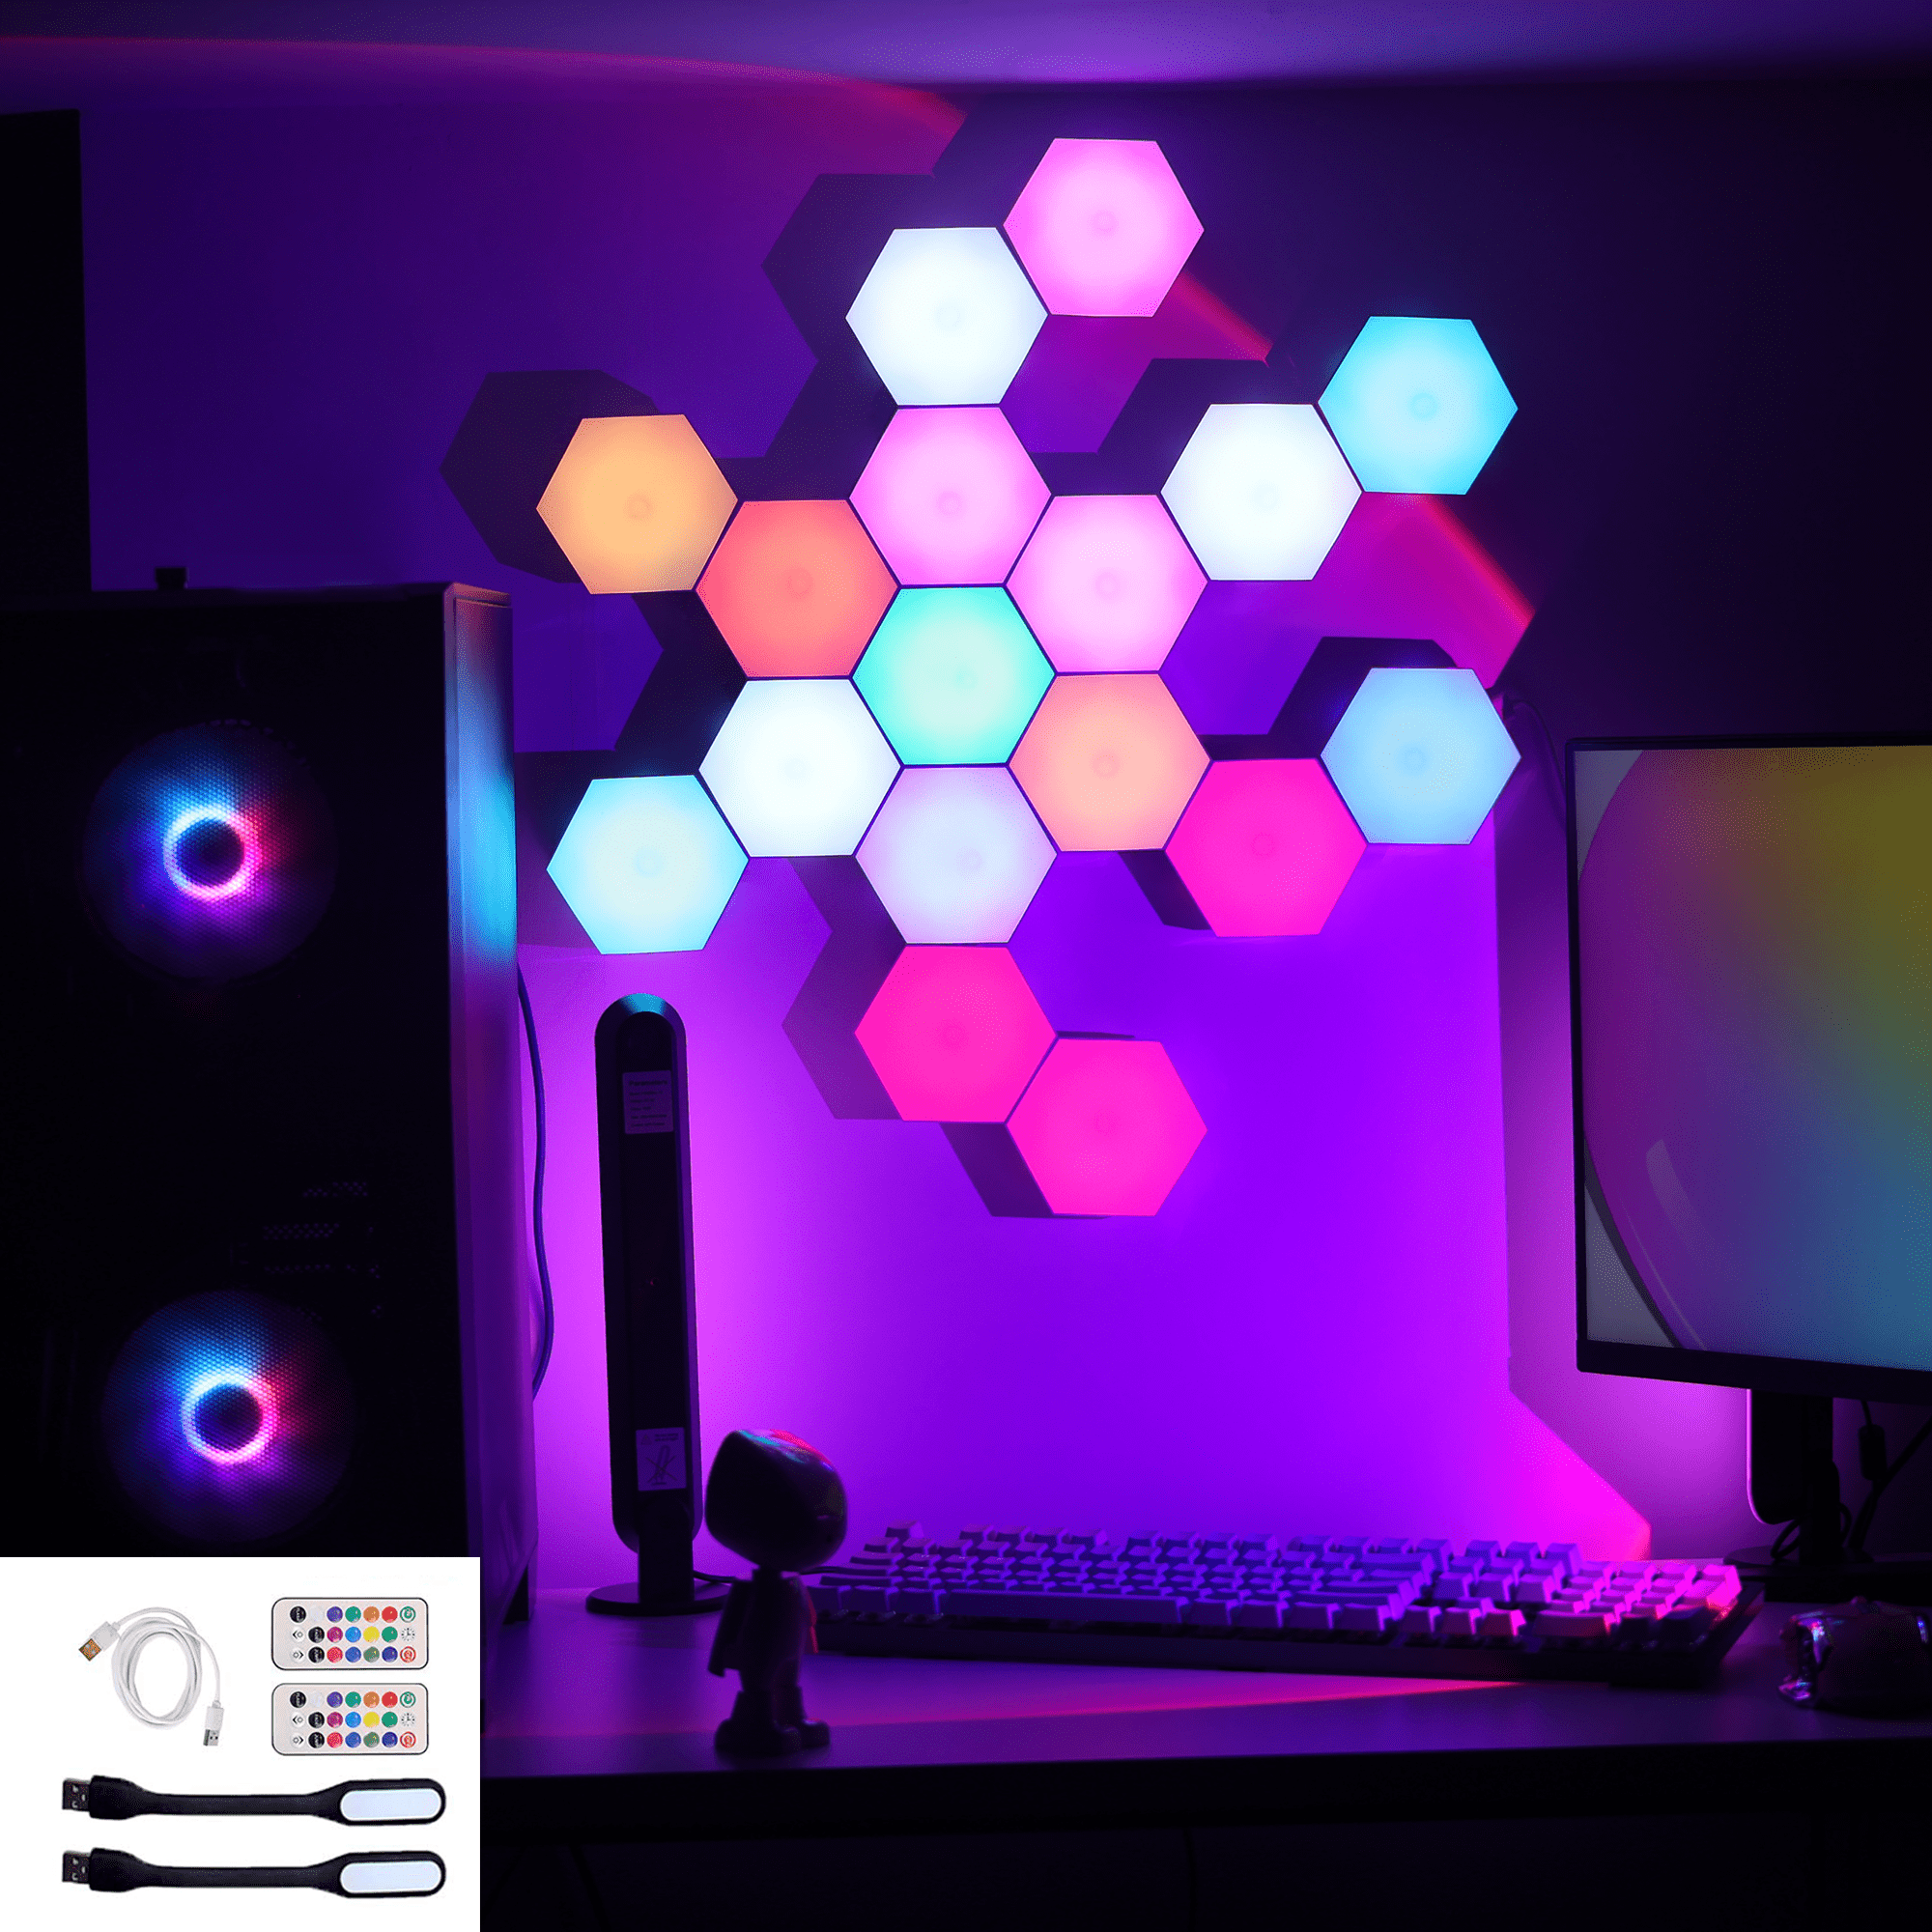 Hexagon Lights, RGB LED Wall Lights with Remote, Smart DIY Touch Sensitive for Room Decor, Party (6-Pack) Walmart.com